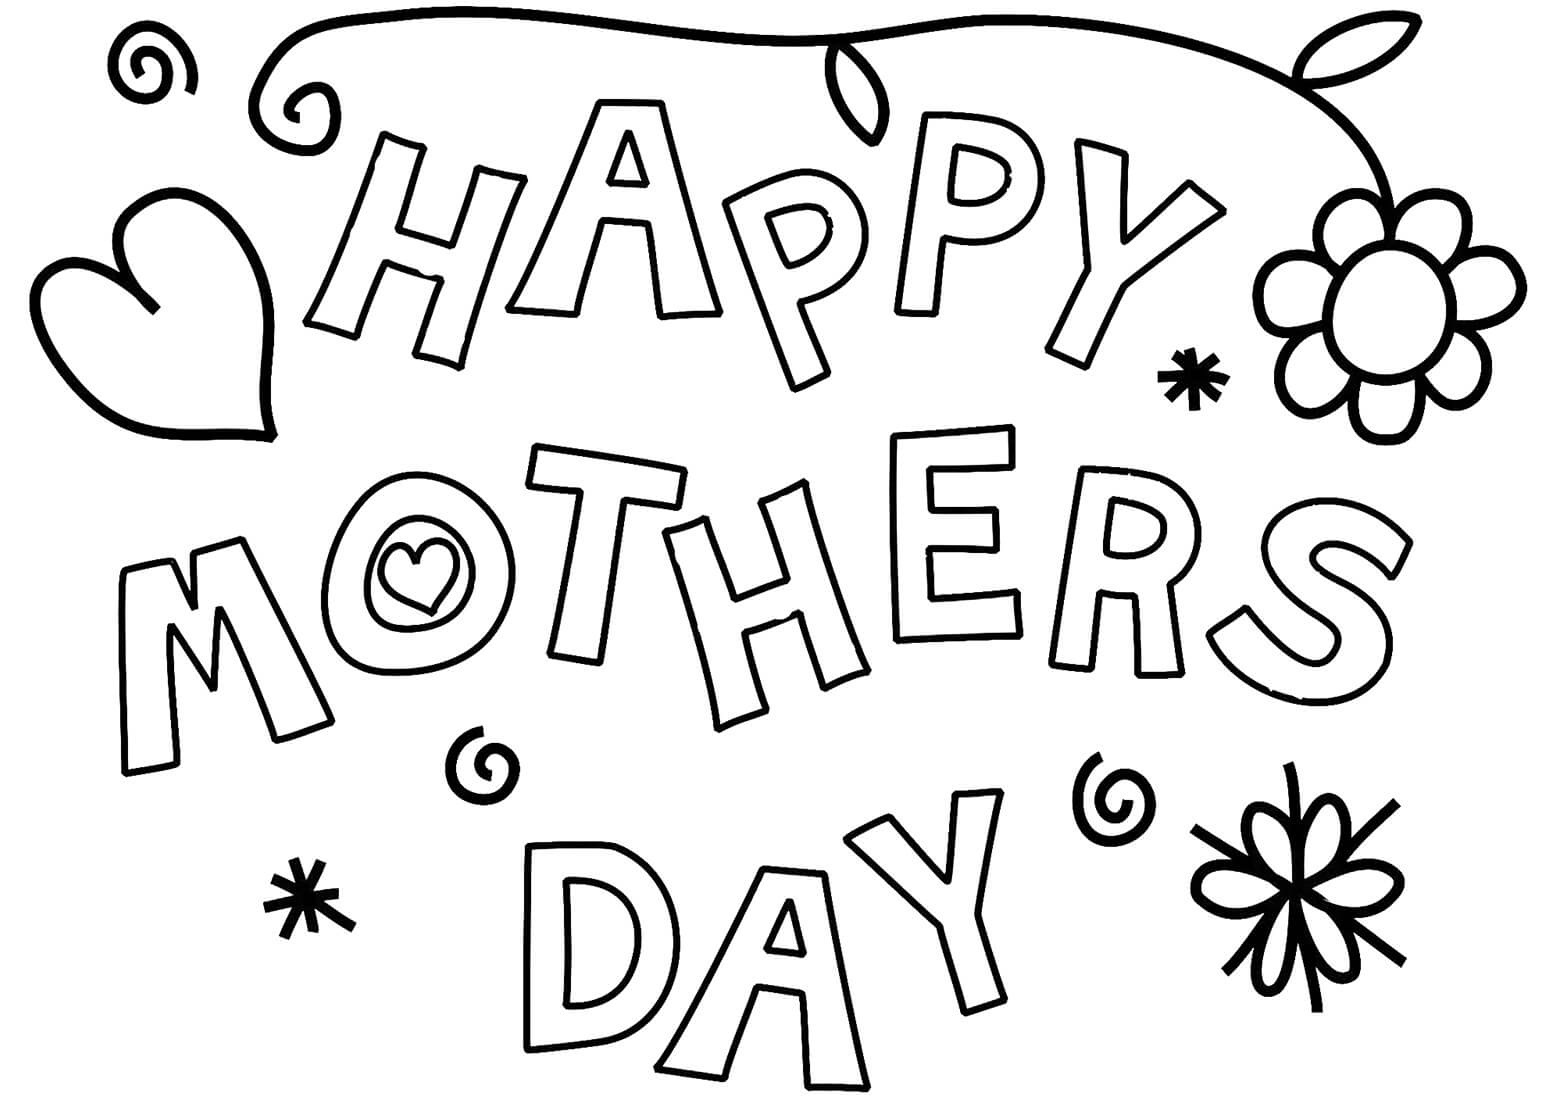 Happy Mother's Day Coloring Page   Free Printable Coloring Pages ...